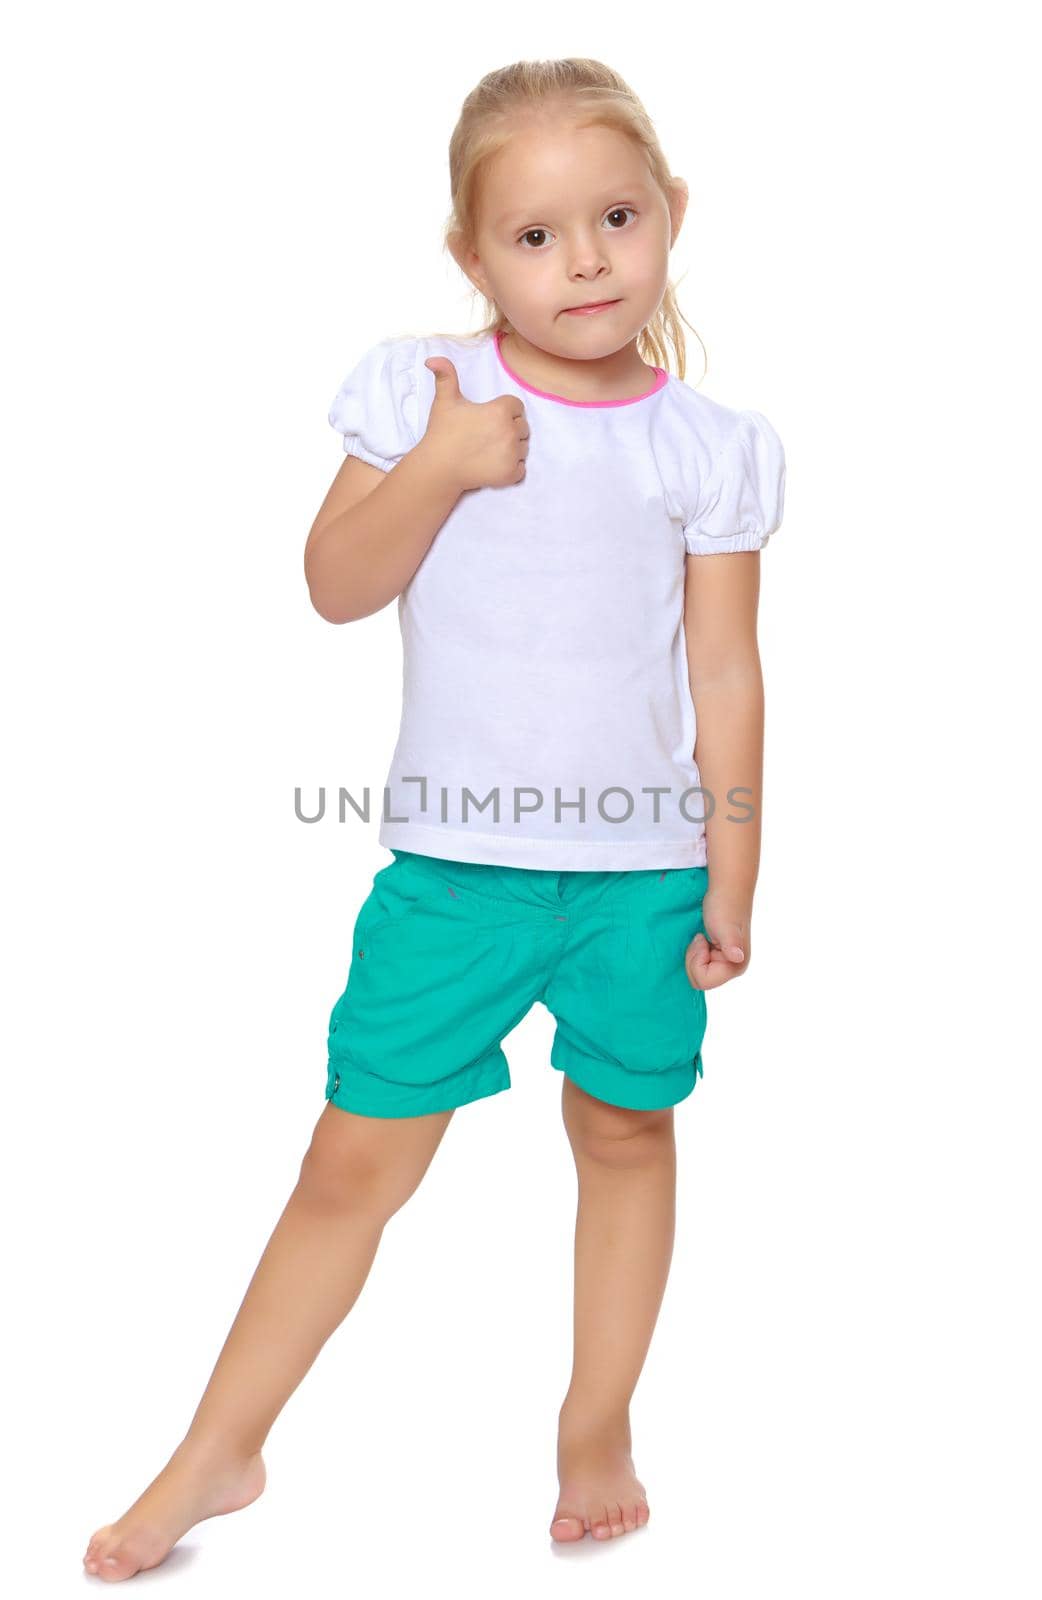 Cute little blond girl in white tank top without a pattern.Girl shows thumb to the side.Isolated on white background